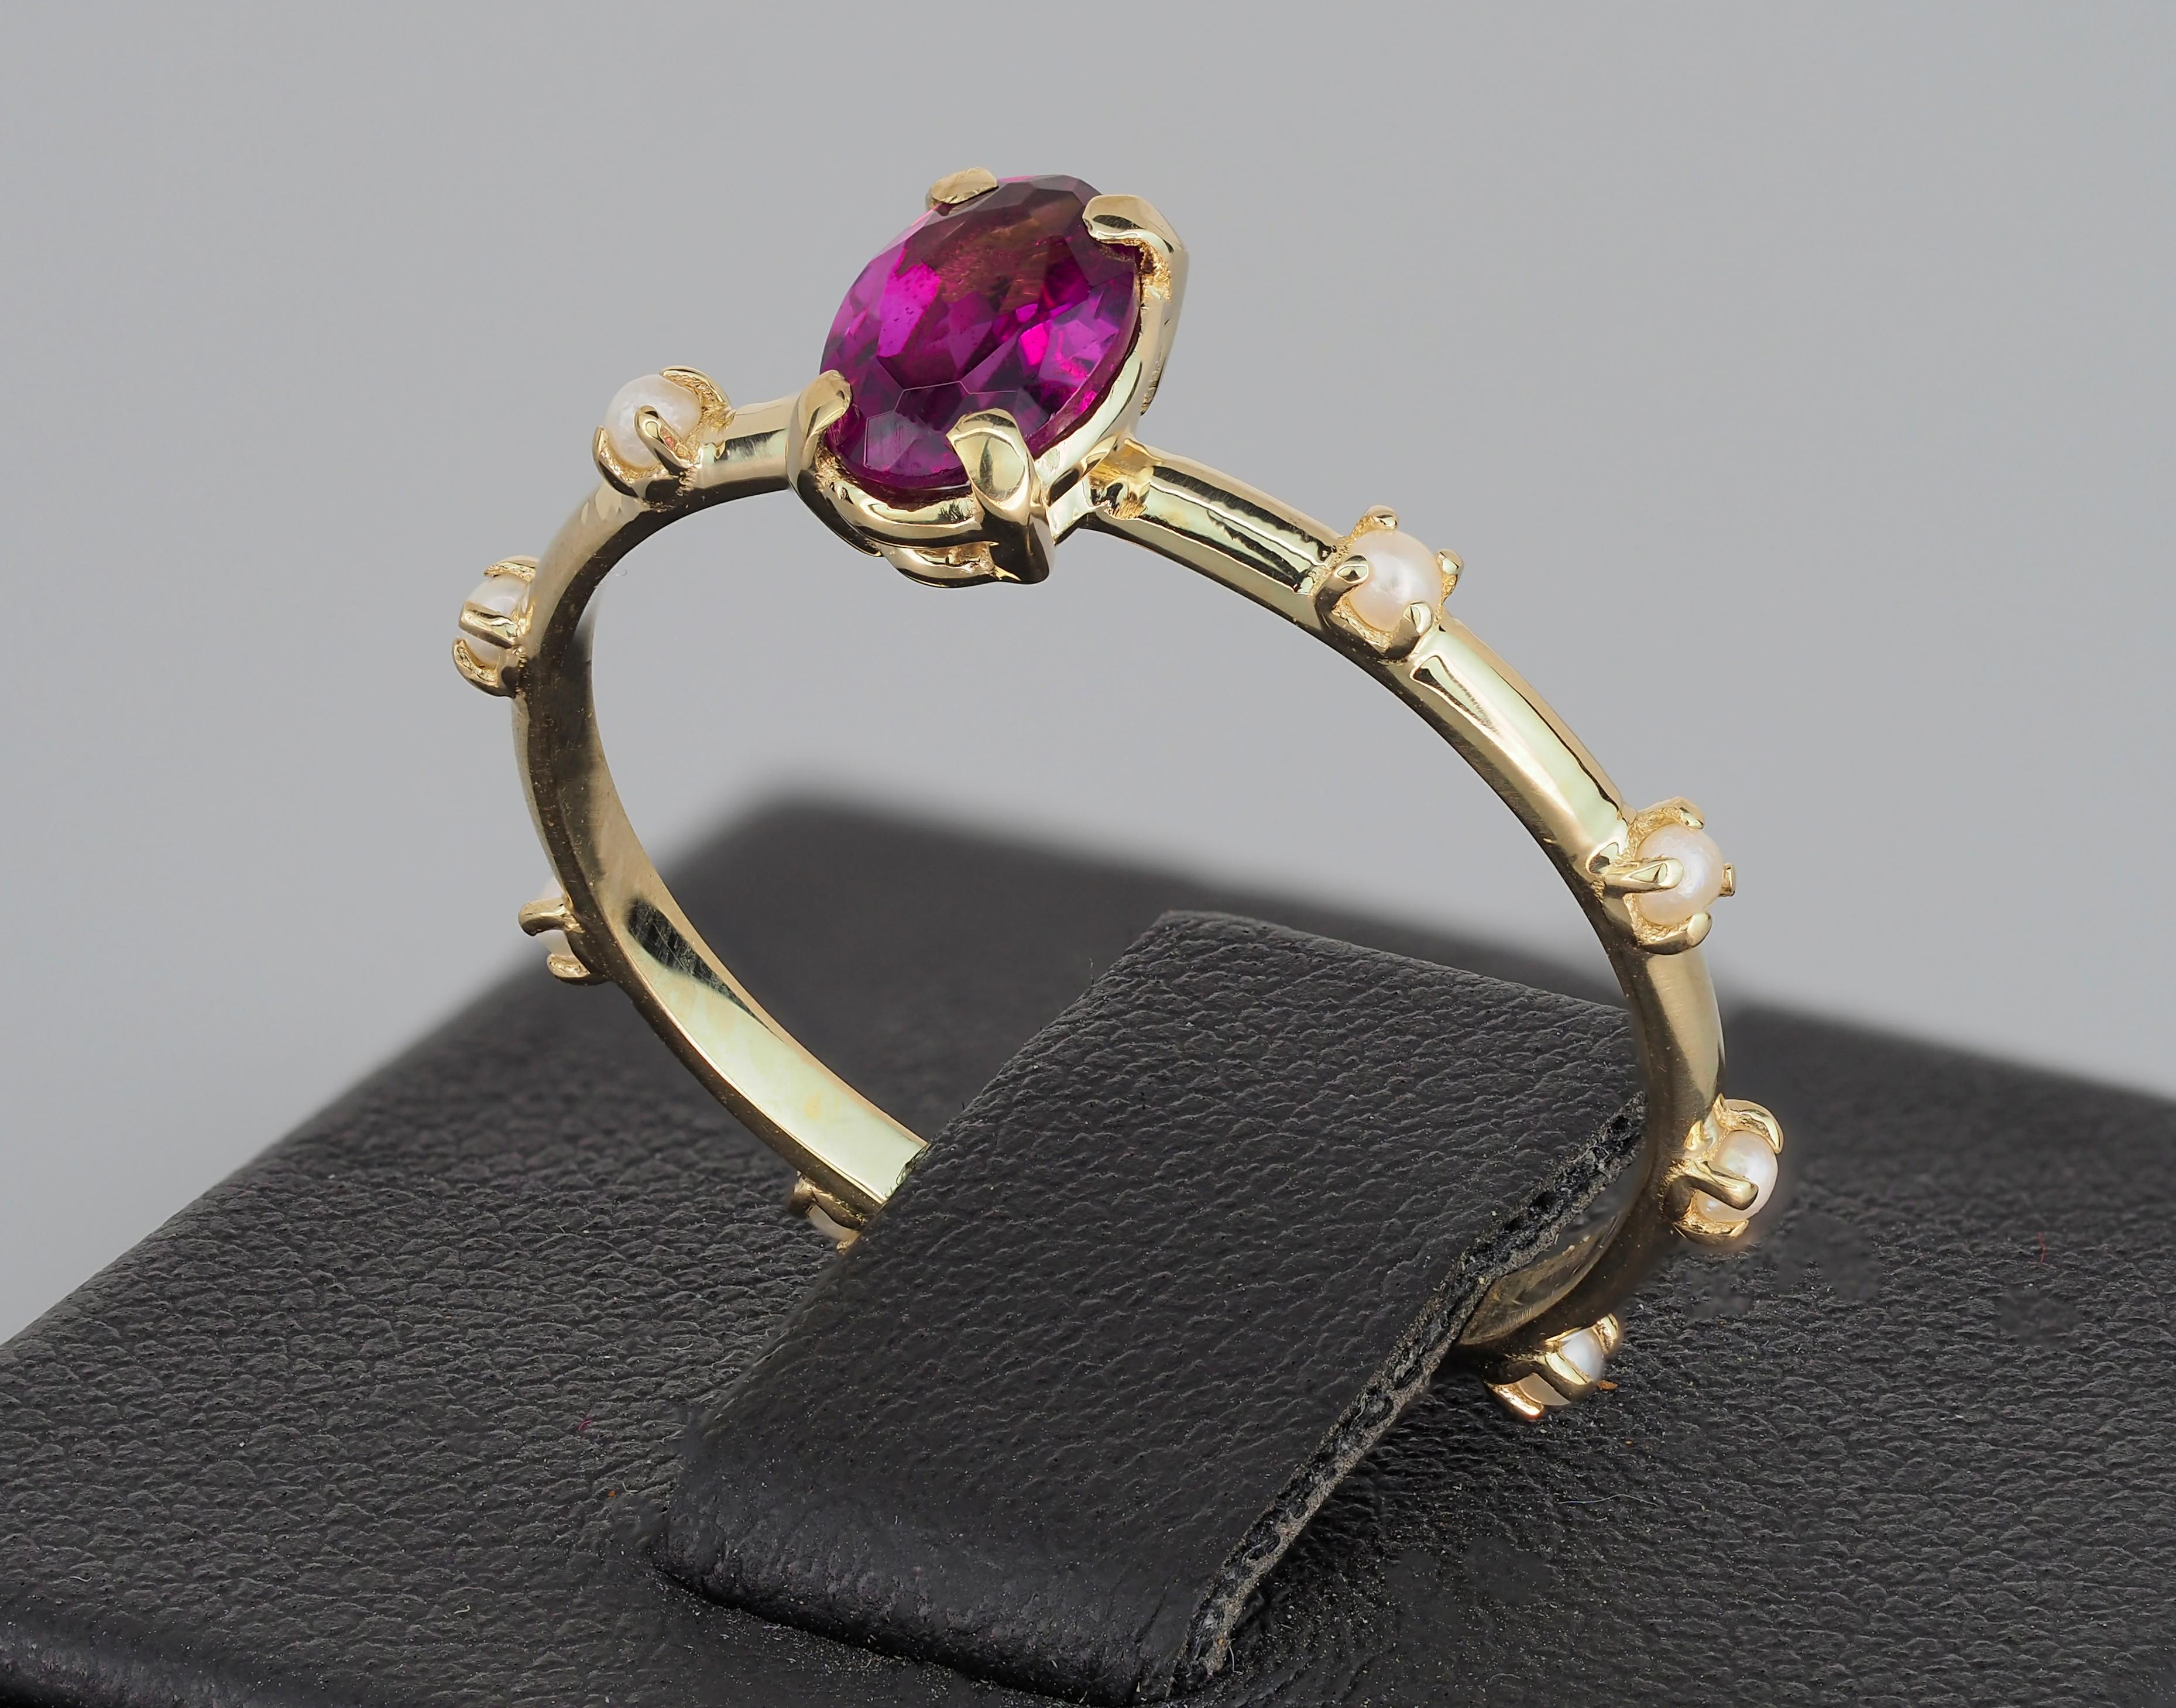 For Sale:  Garnet and pearls 14k gold ring. Eternity ring 3